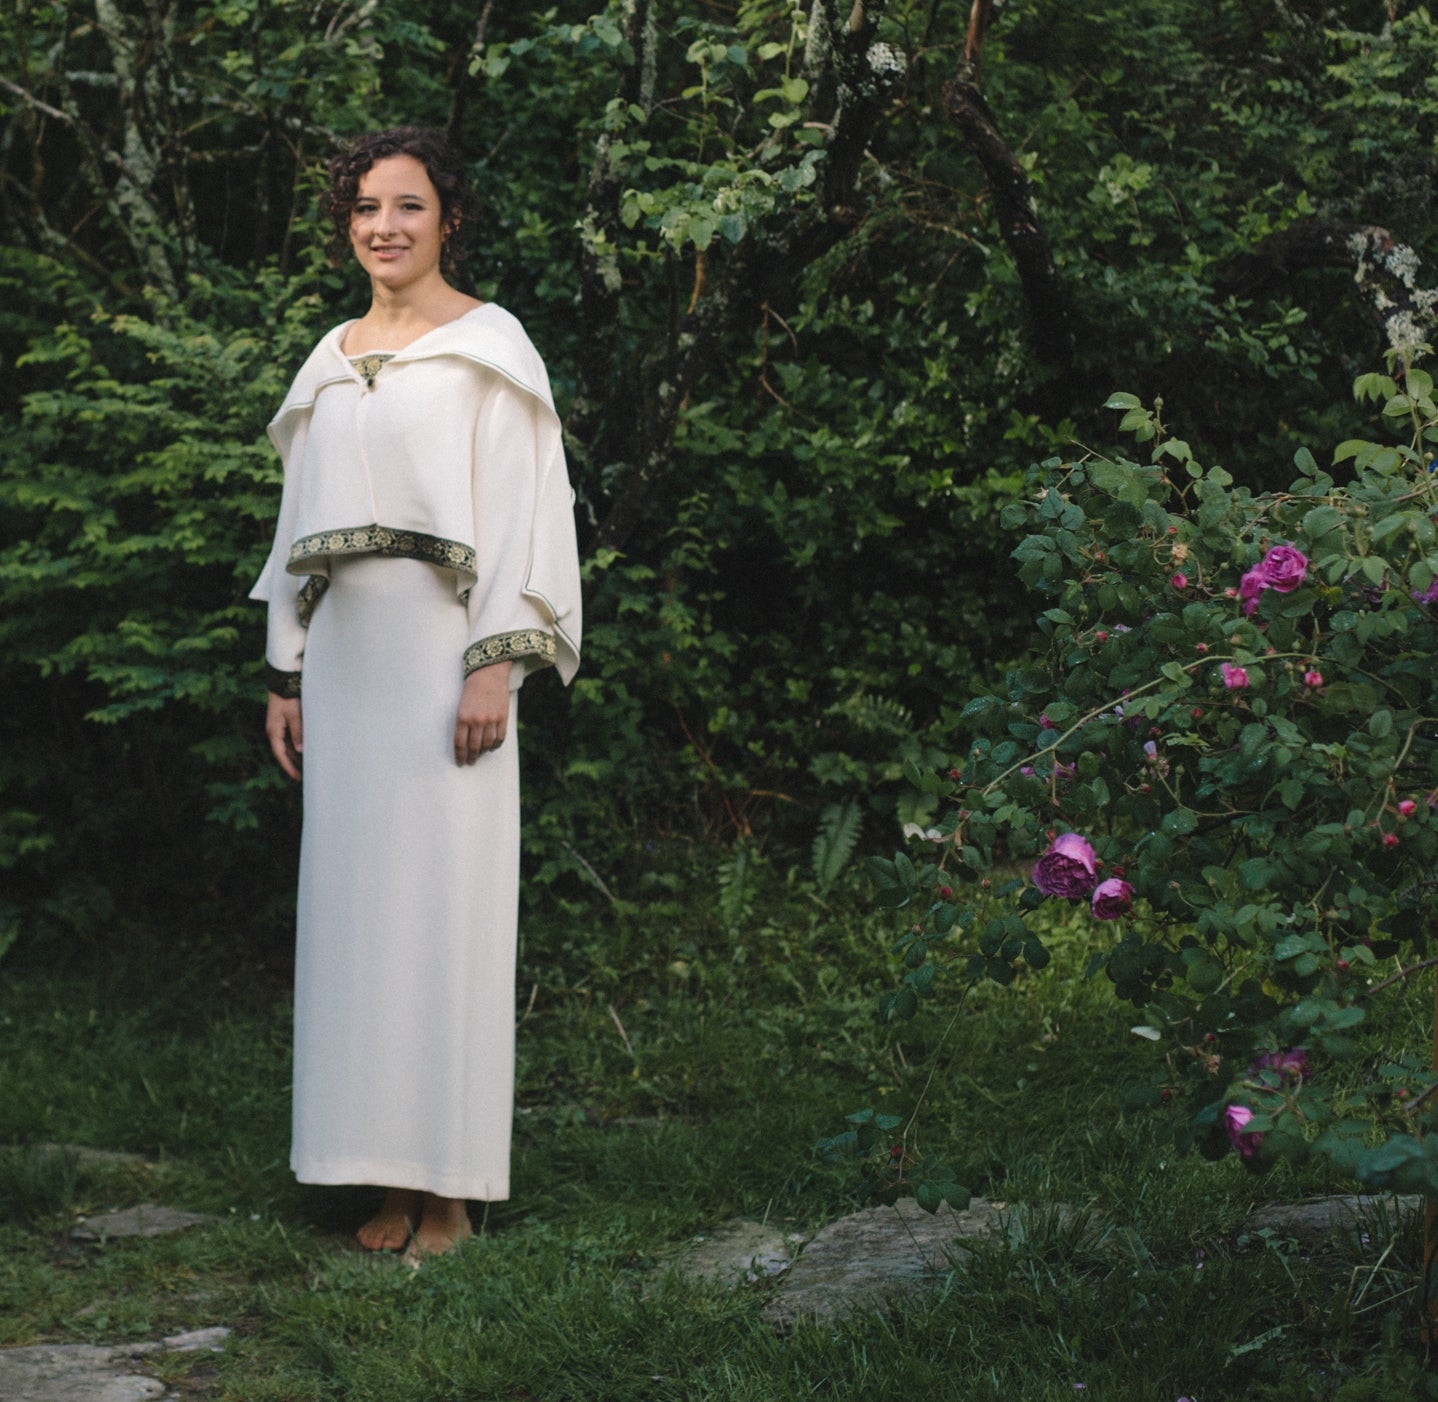 Young Brunette White woman wearing the #266 Greek Island Dress with Jacket in white standing surrounded by Greenery. 